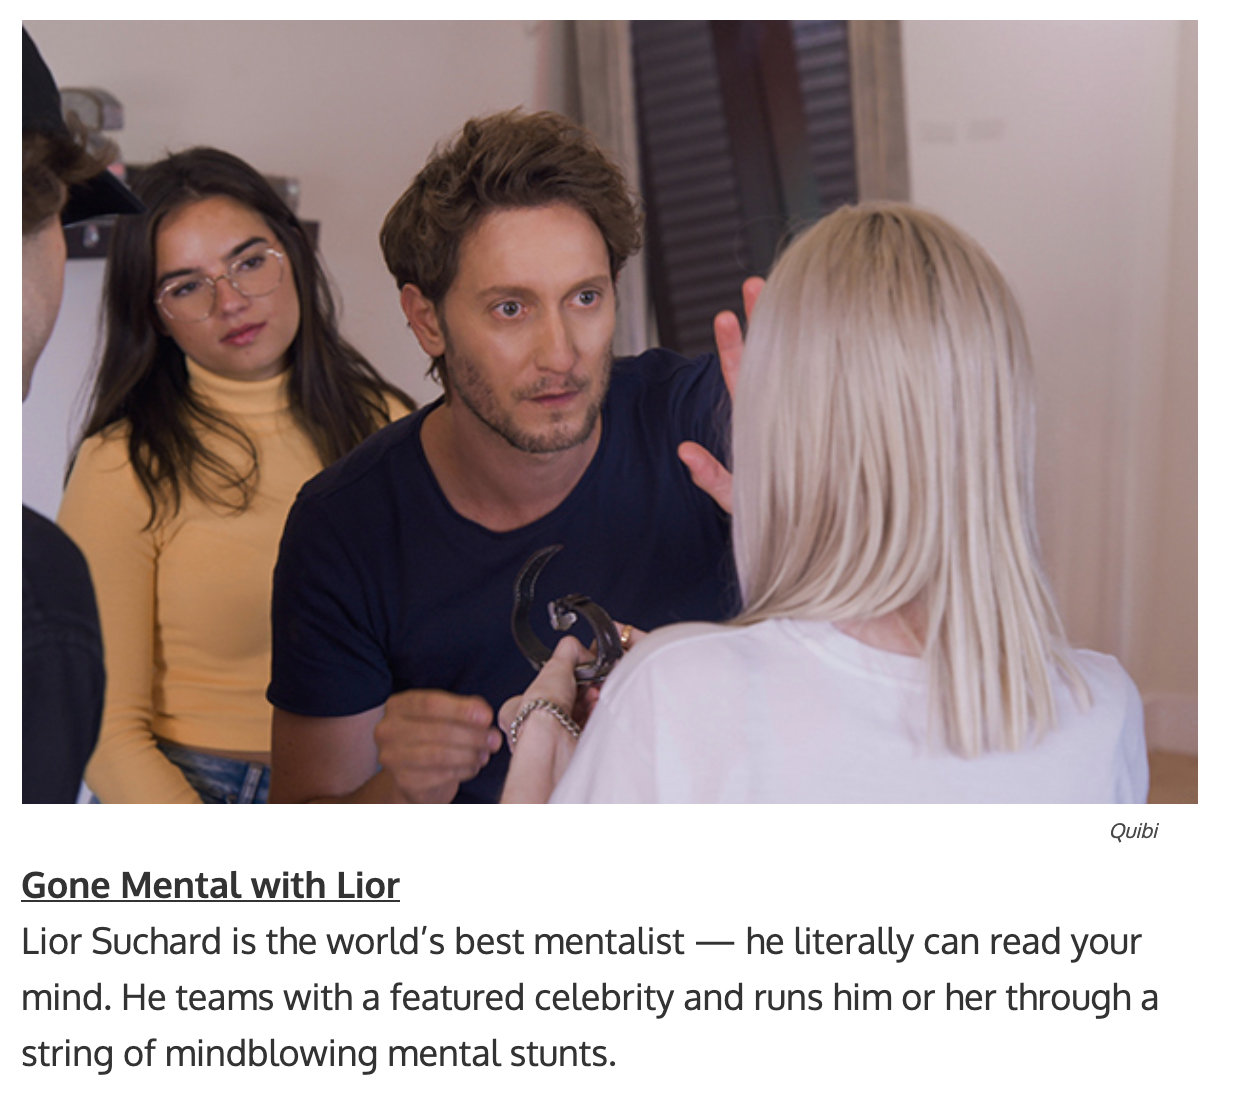 quibi show titles - Lior Suchard is the world’s best mentalist — he literally can read your mind. He teams with a featured celebrity and runs him or her through a string of mindblowing mental stunts.